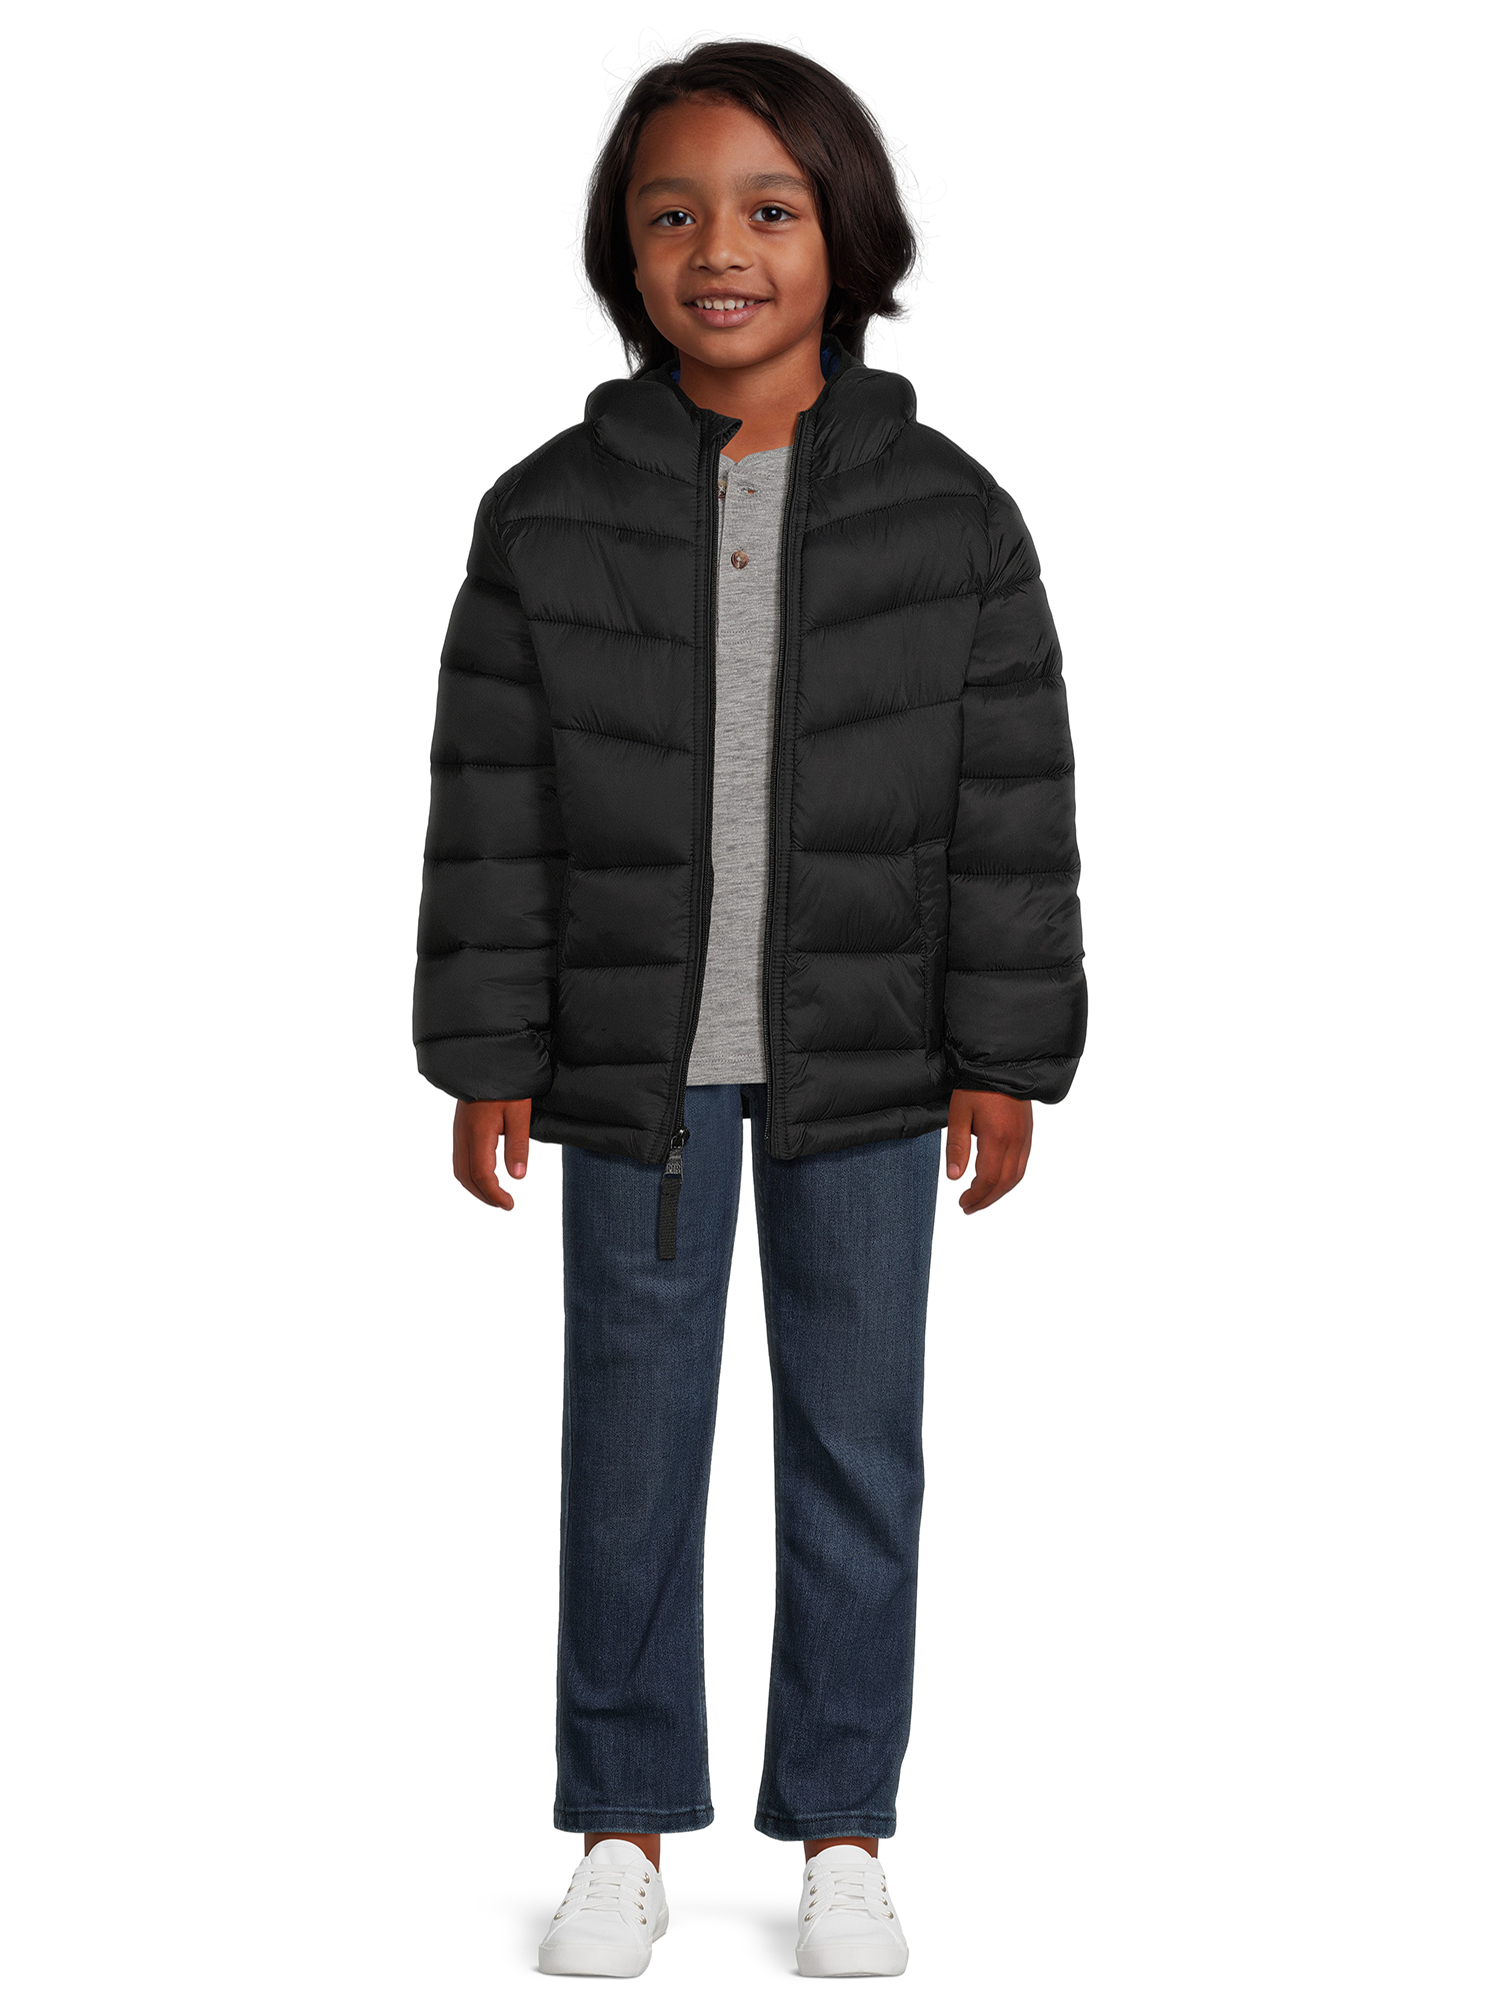 Urban Republic Boys Packable Puffer Jacket with Hood, Sizes 5-20 ...